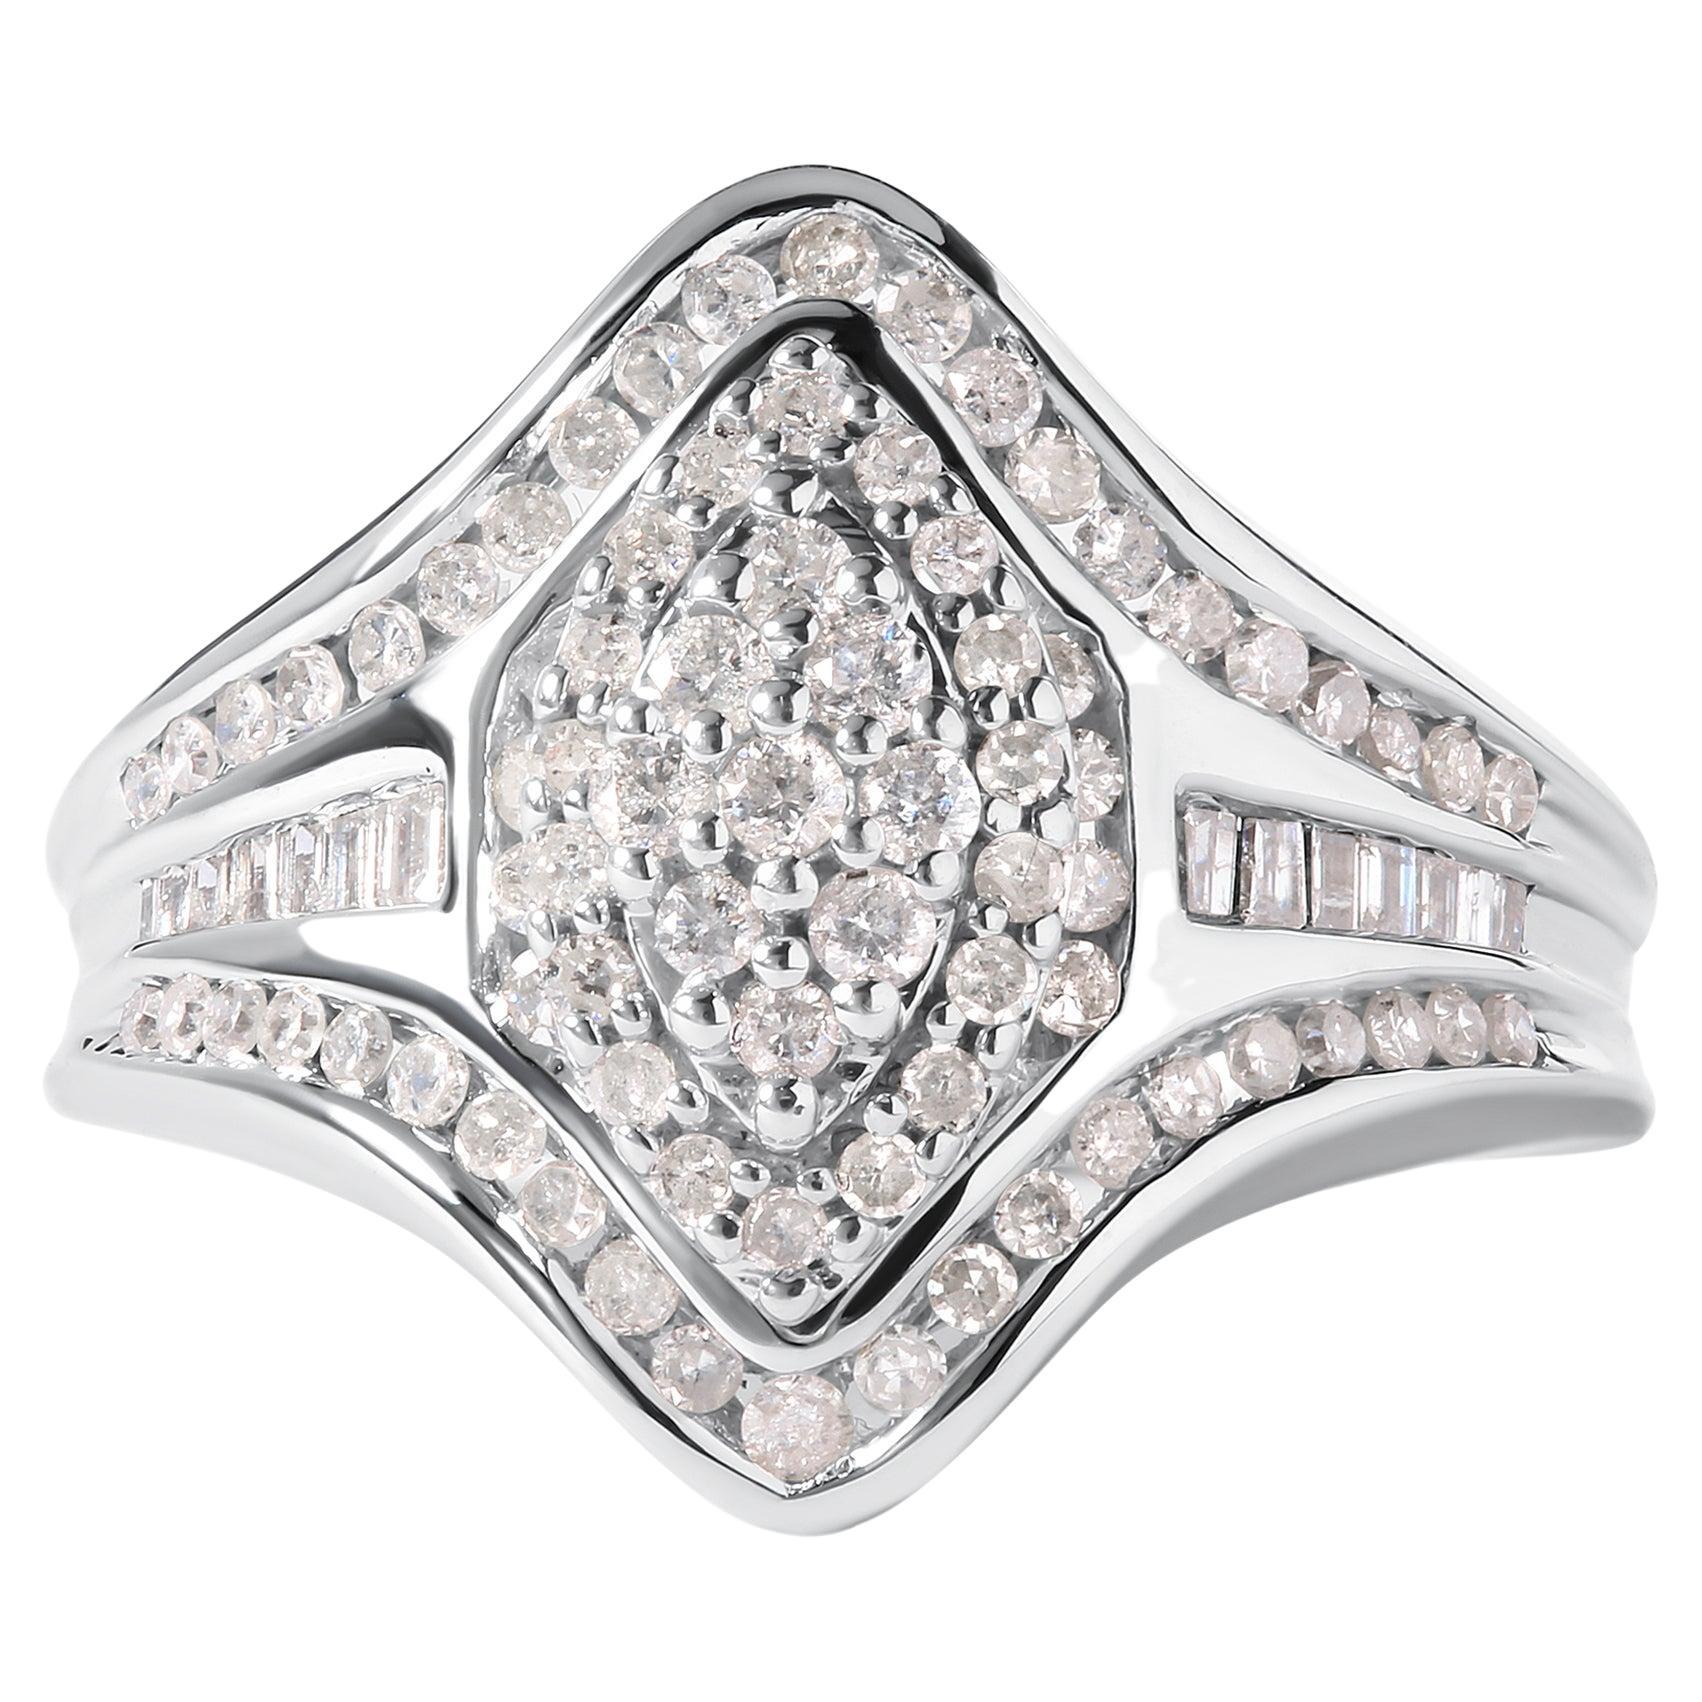 14K White Gold 3/4 Carat Round and Baguette-Cut Diamond Cluster Ring